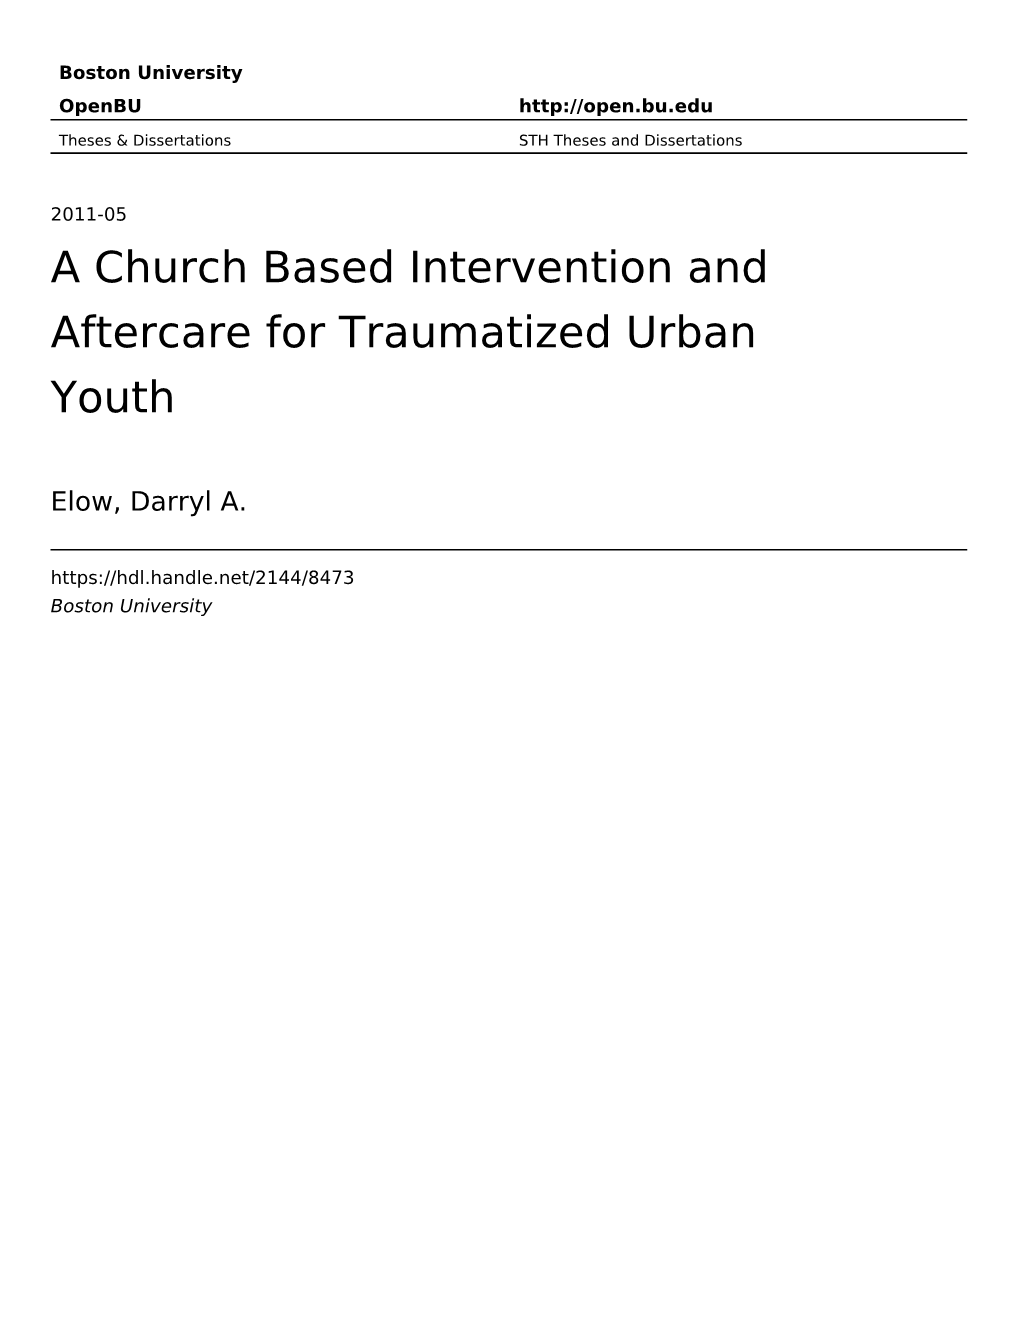 A Church Based Intervention and Aftercare for Traumatized Urban Youth